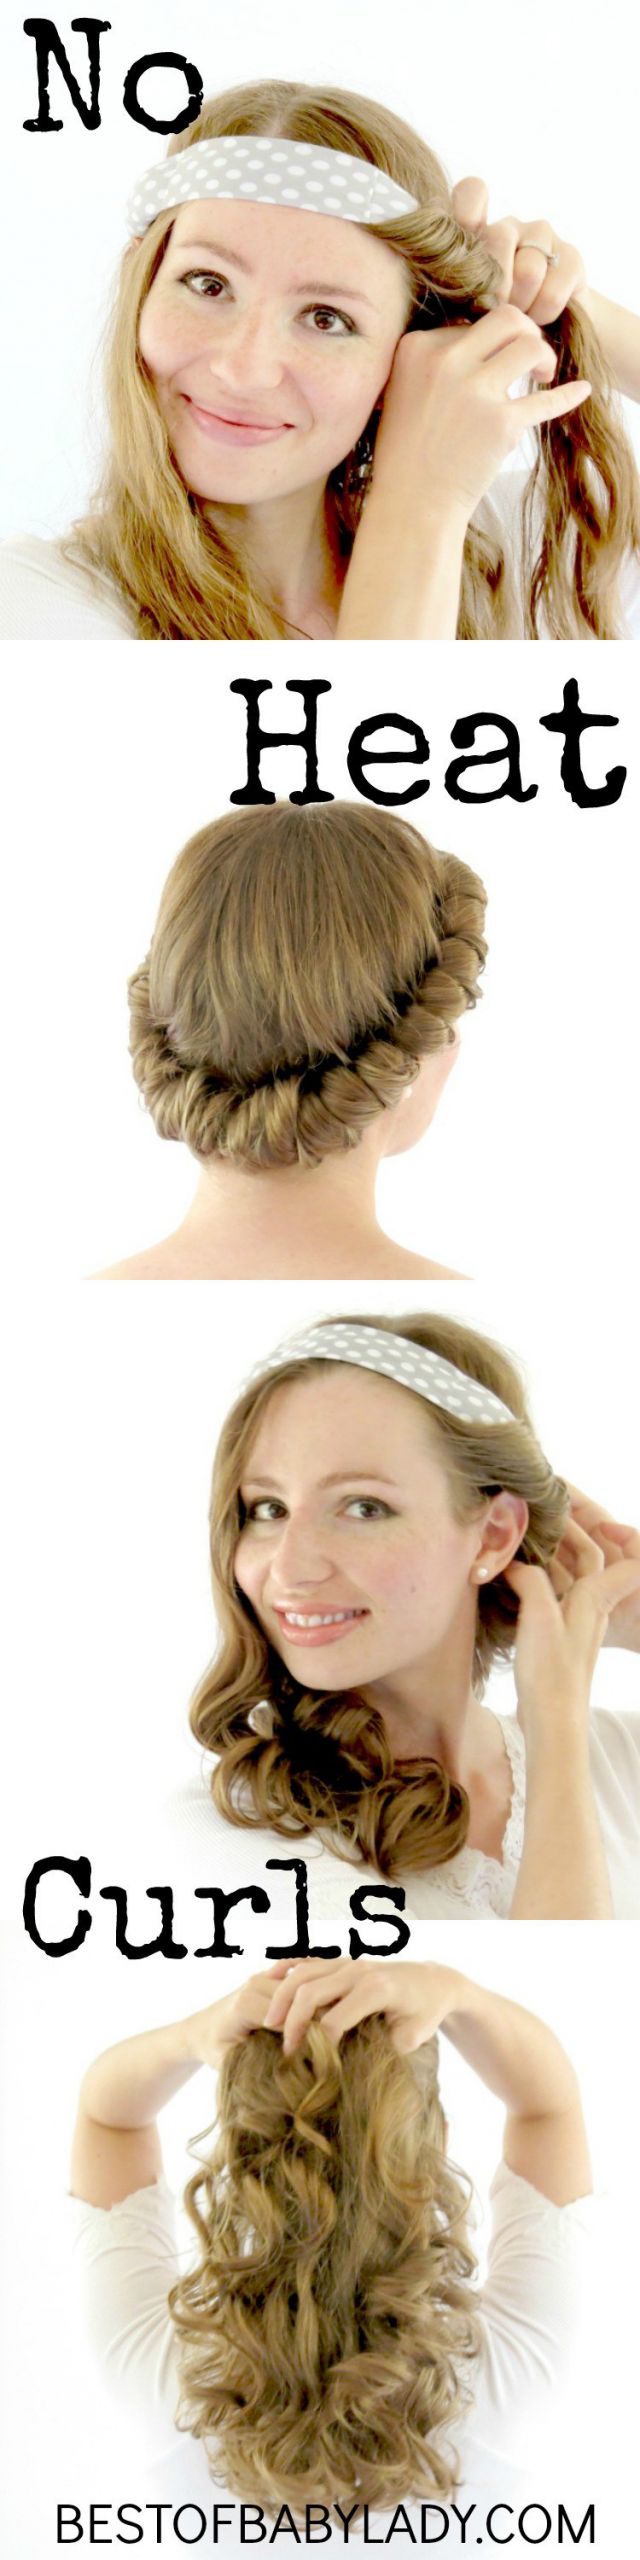 Easy Overnight Hairstyles
 Pin on Twinkly Tuesday